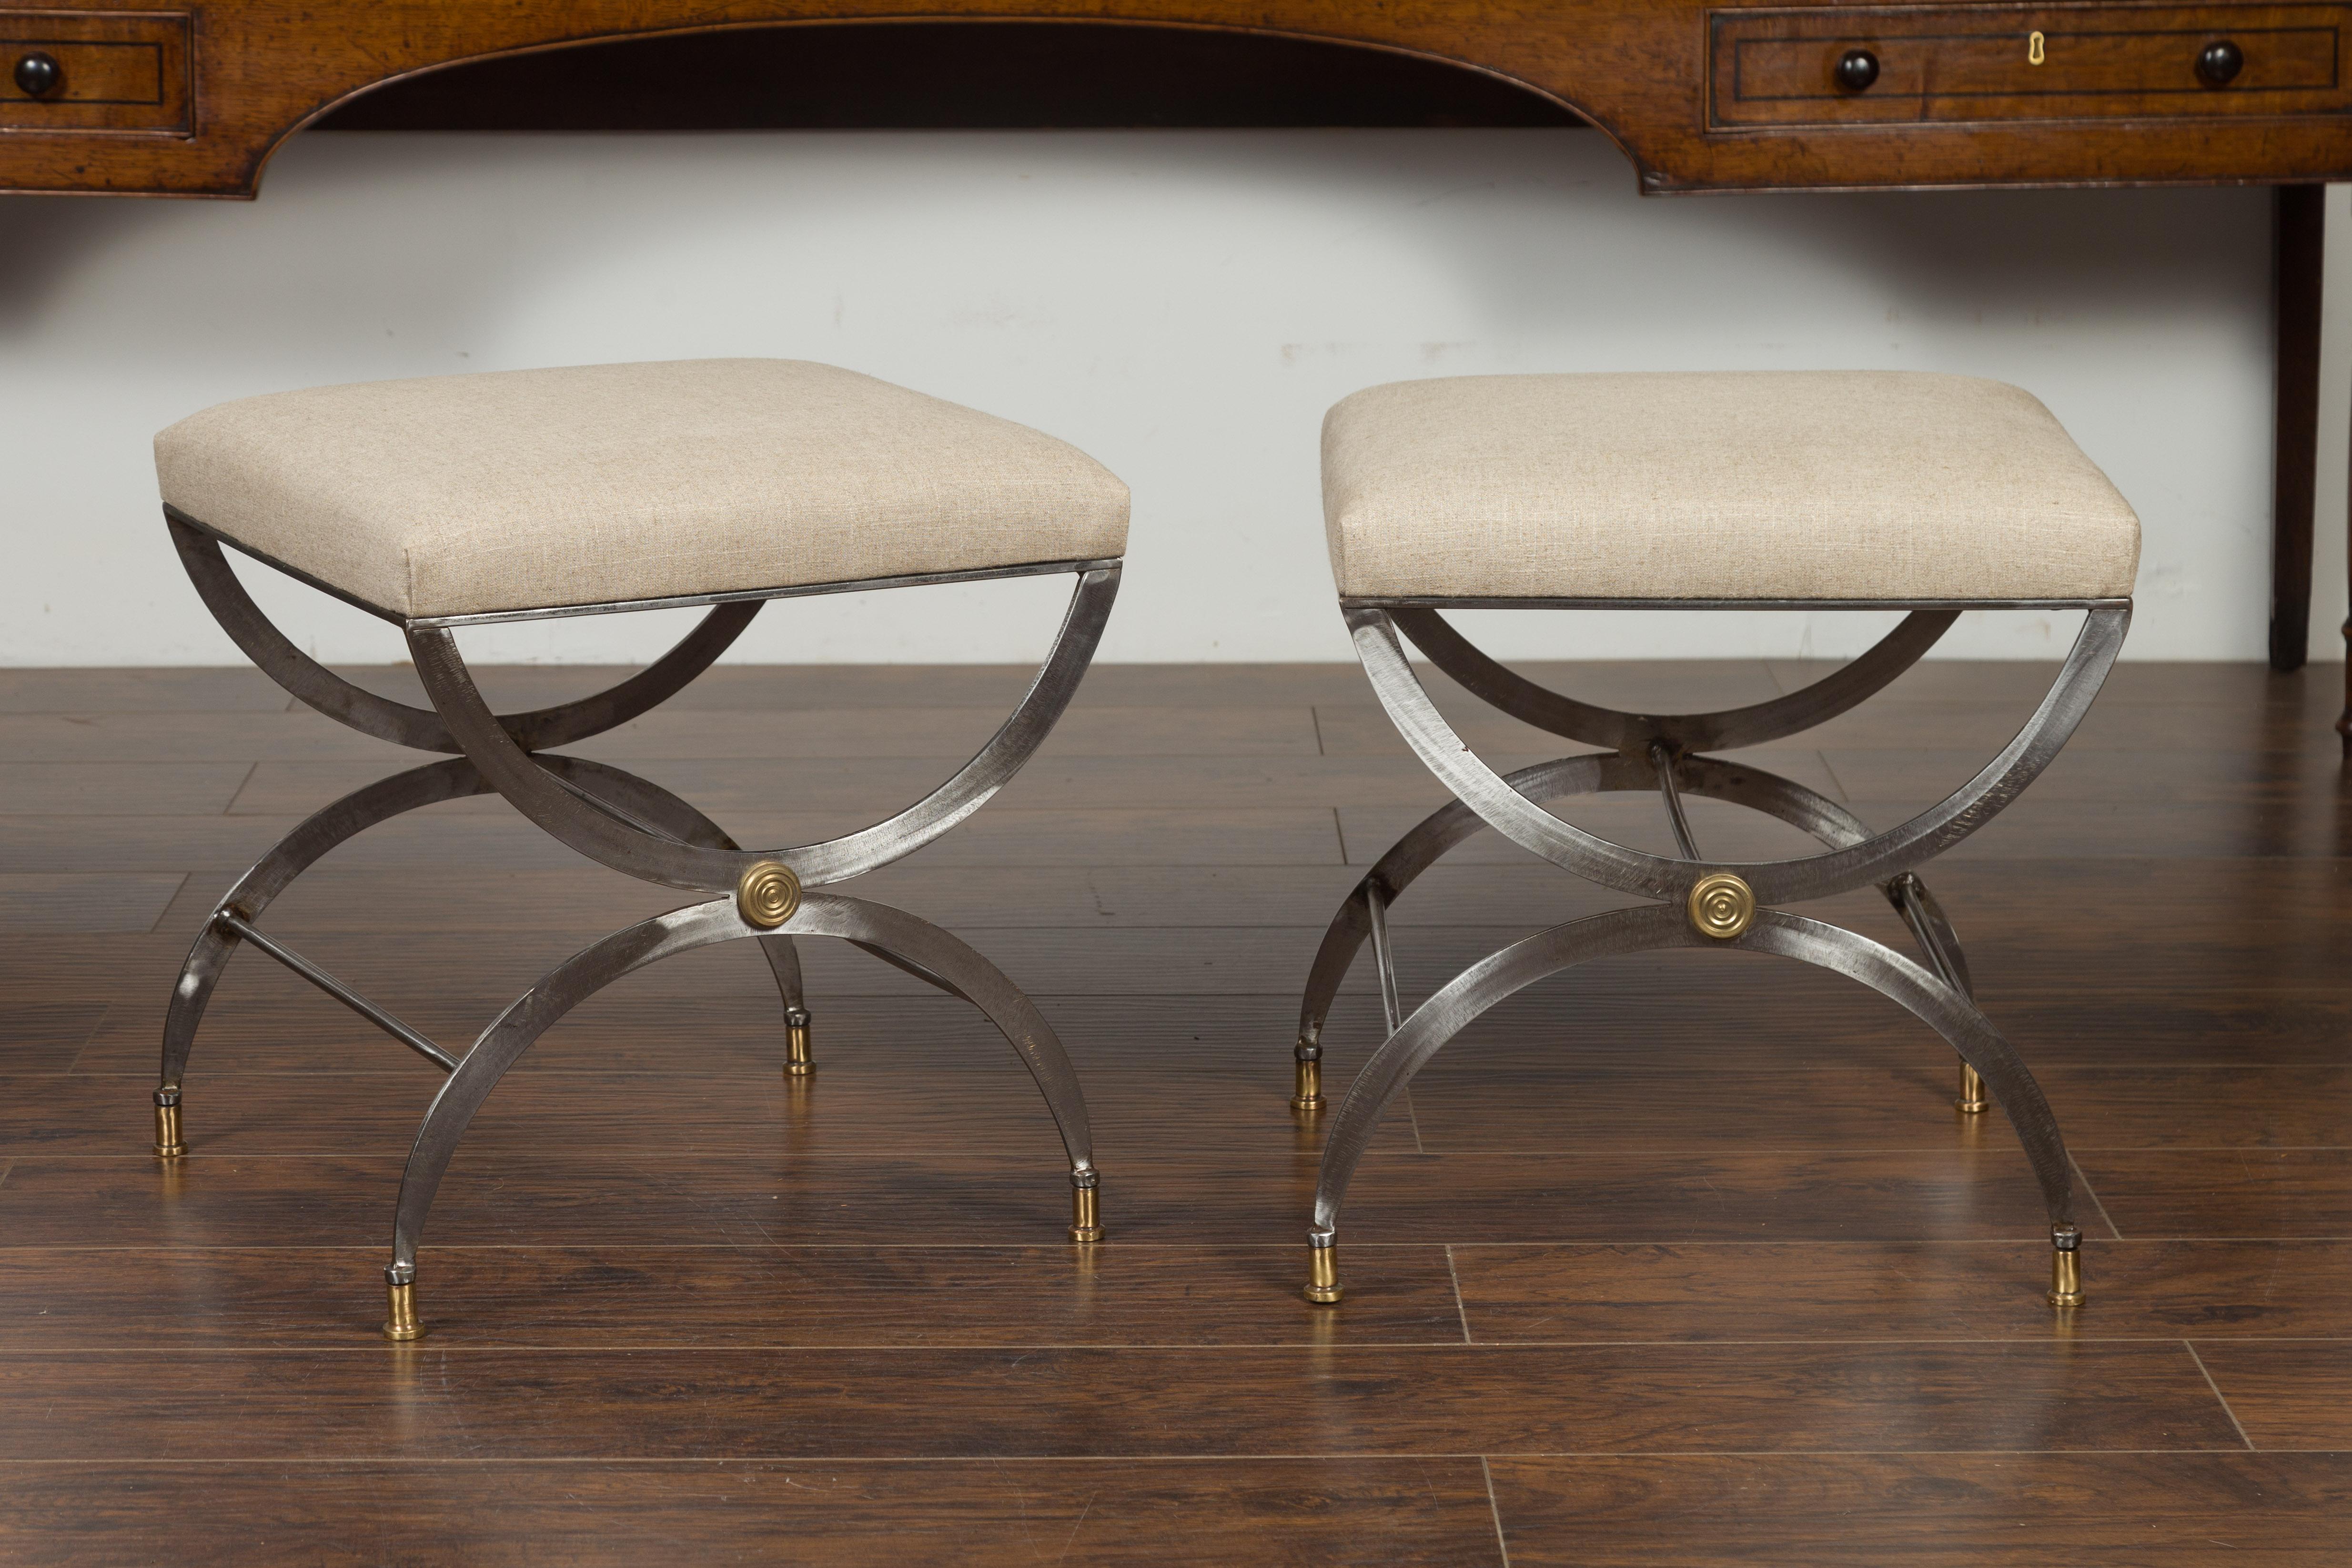 A pair of Italian vintage steel curule stools from the mid-20th century, with brass accents and new upholstery. Created in Italy during the midcentury period, each of this pair of stools captures our attention with its steel and brass structure